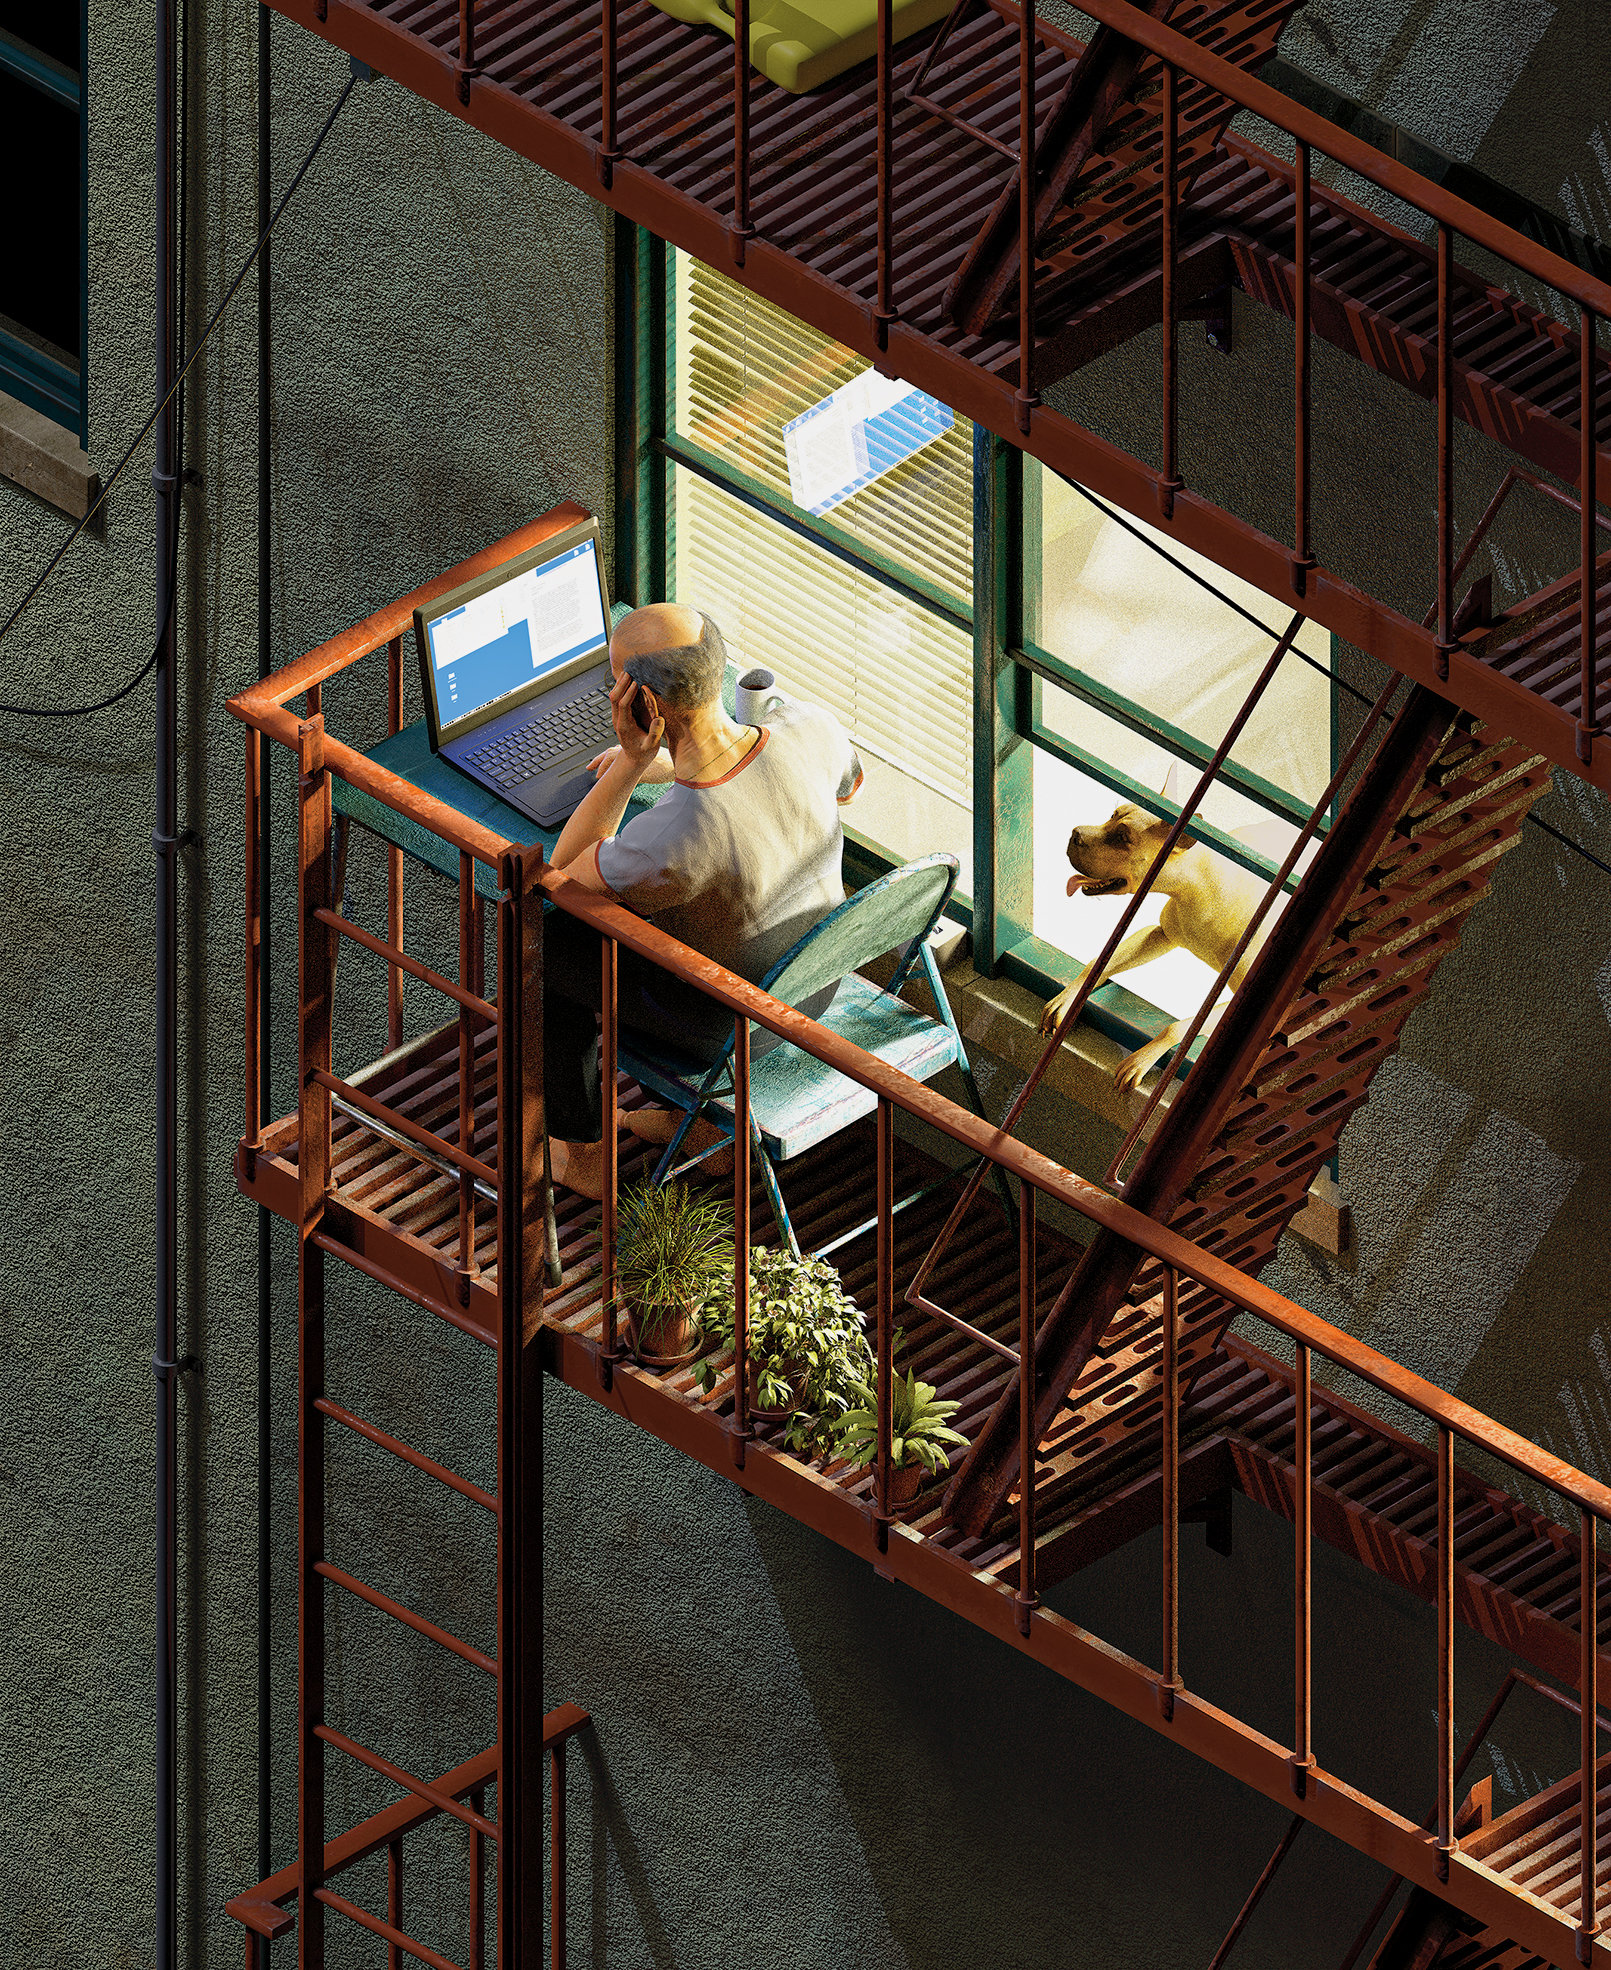 Fire Escape - Working Remote NYTimes Josh Harcus Illustration by Max Guther